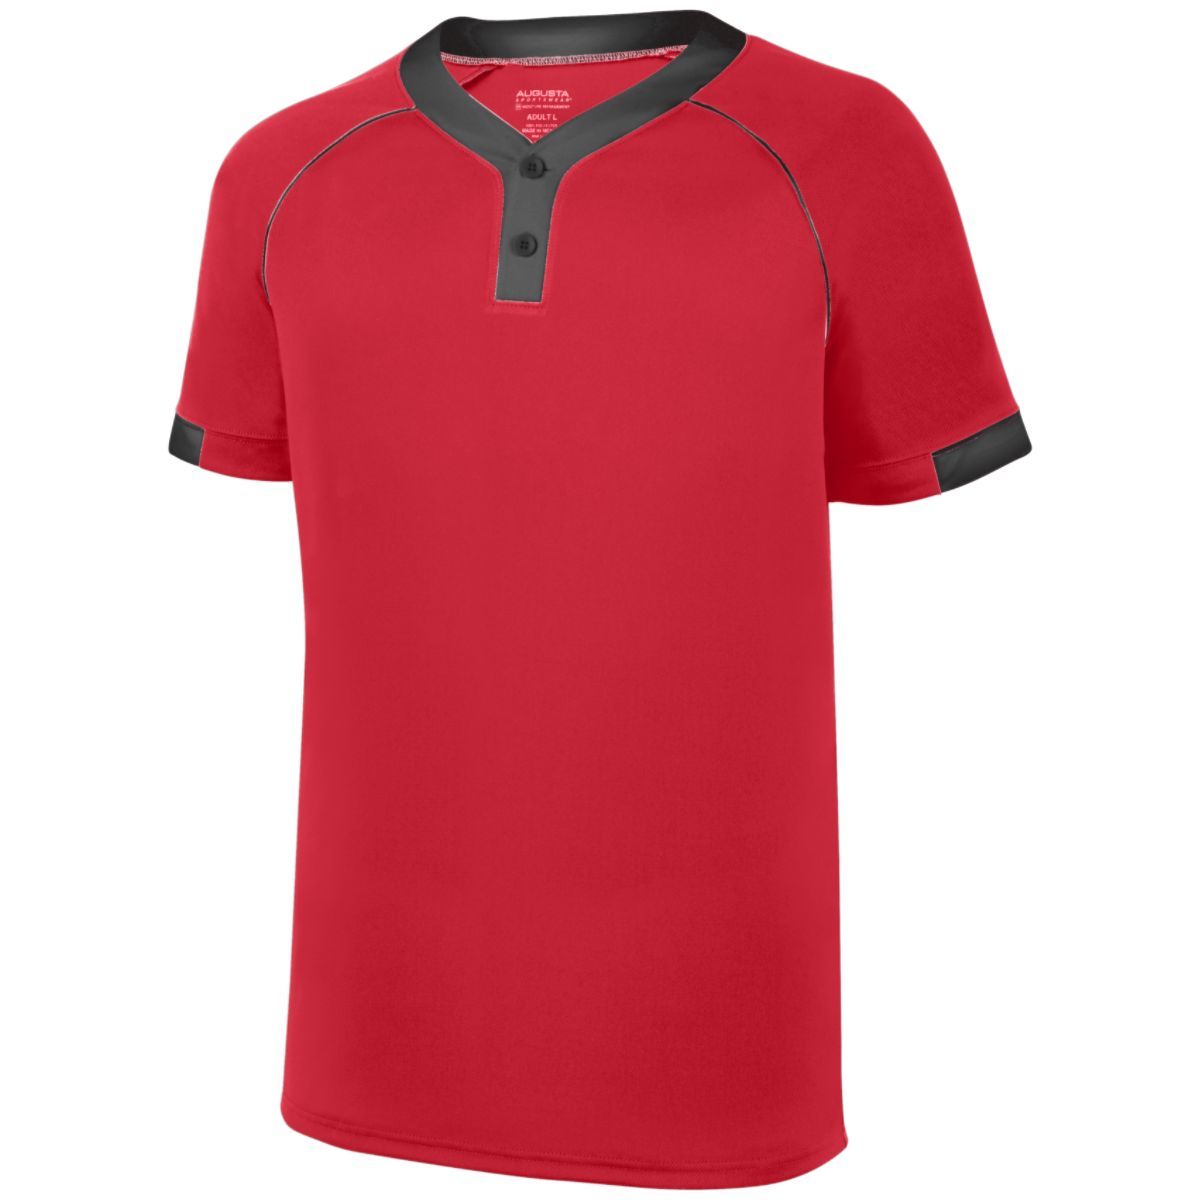 Augusta Sportswear Stanza Jersey in Red/Black  -Part of the Adult, Adult-Jersey, Augusta-Products, Baseball, Shirts, All-Sports, All-Sports-1 product lines at KanaleyCreations.com